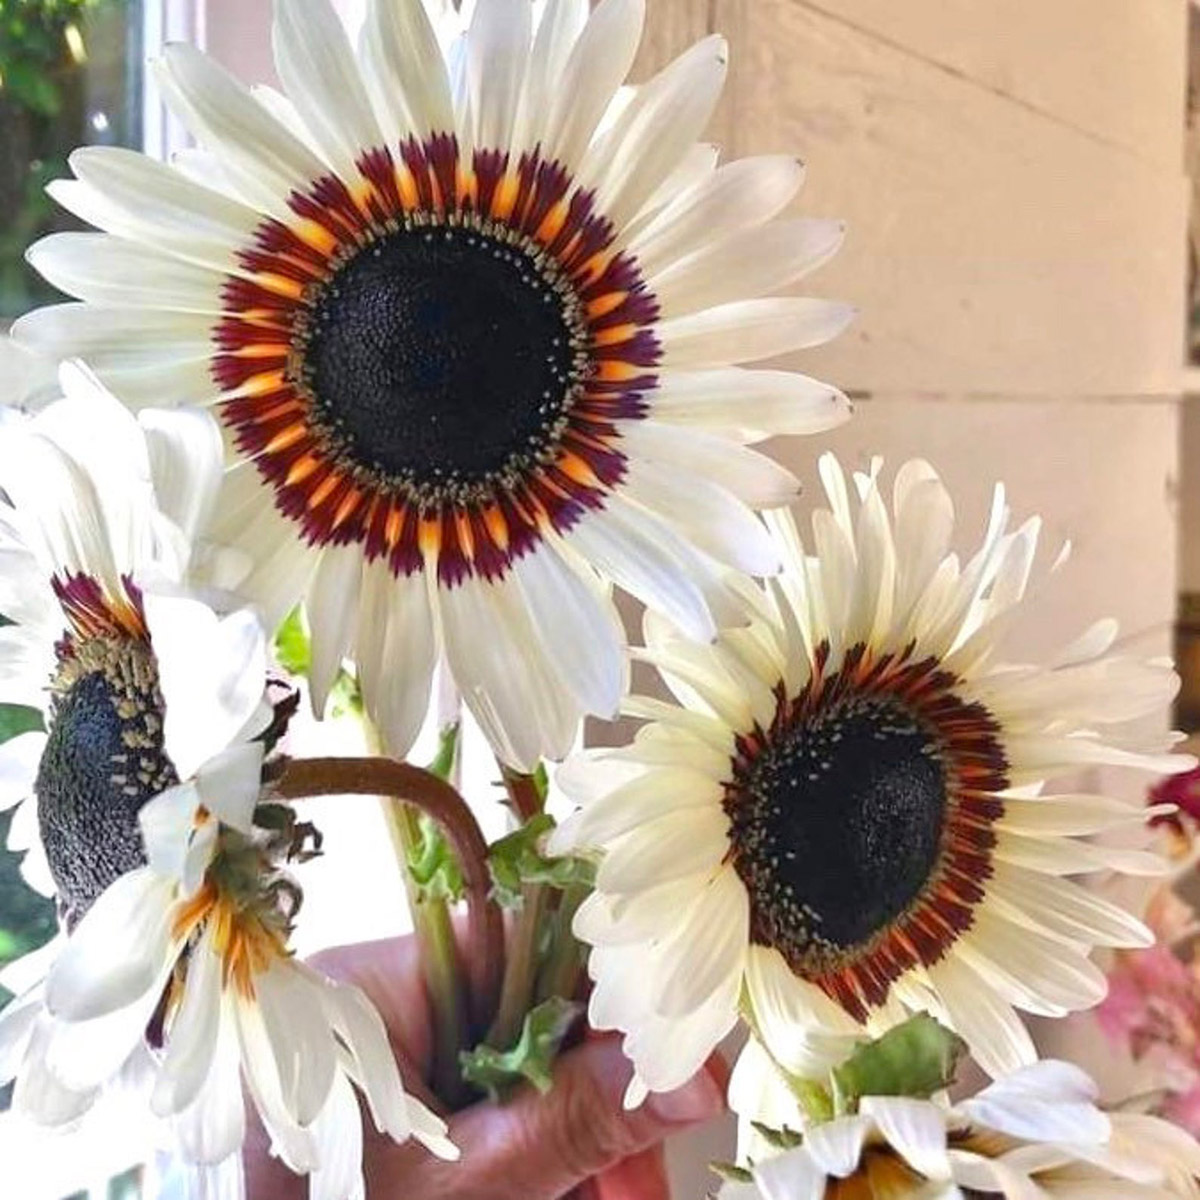 Zulu Prince Daisy Flower Seeds Available at Etsy from Zillysgarden